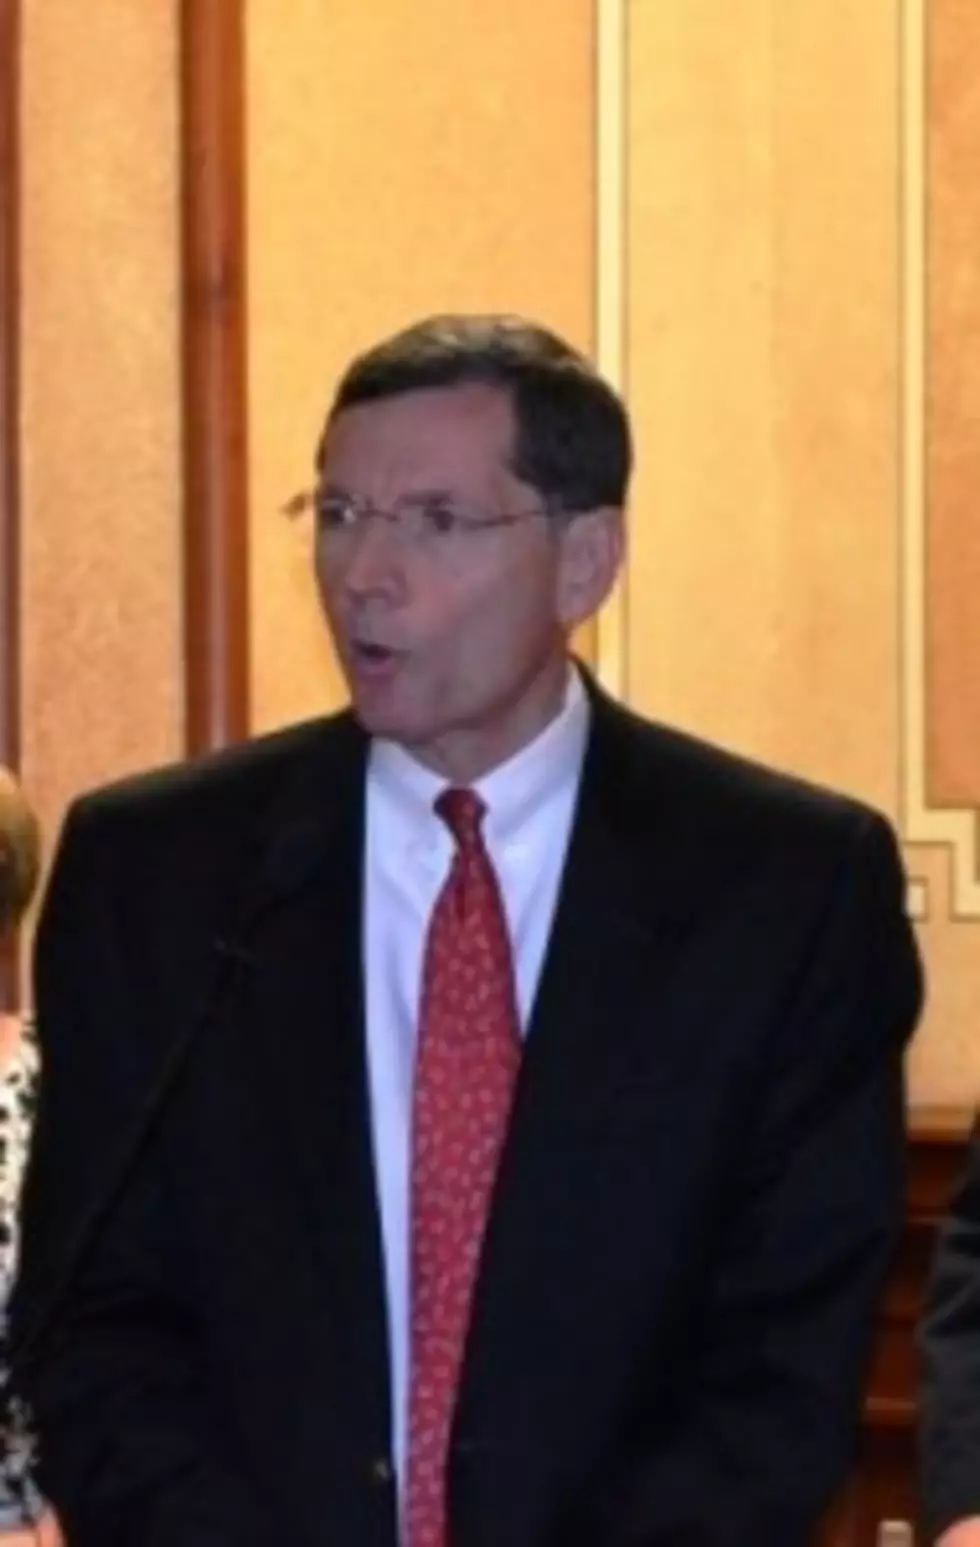 Sen. Barrasso Says He Will Run For Another Term [AUDIO]